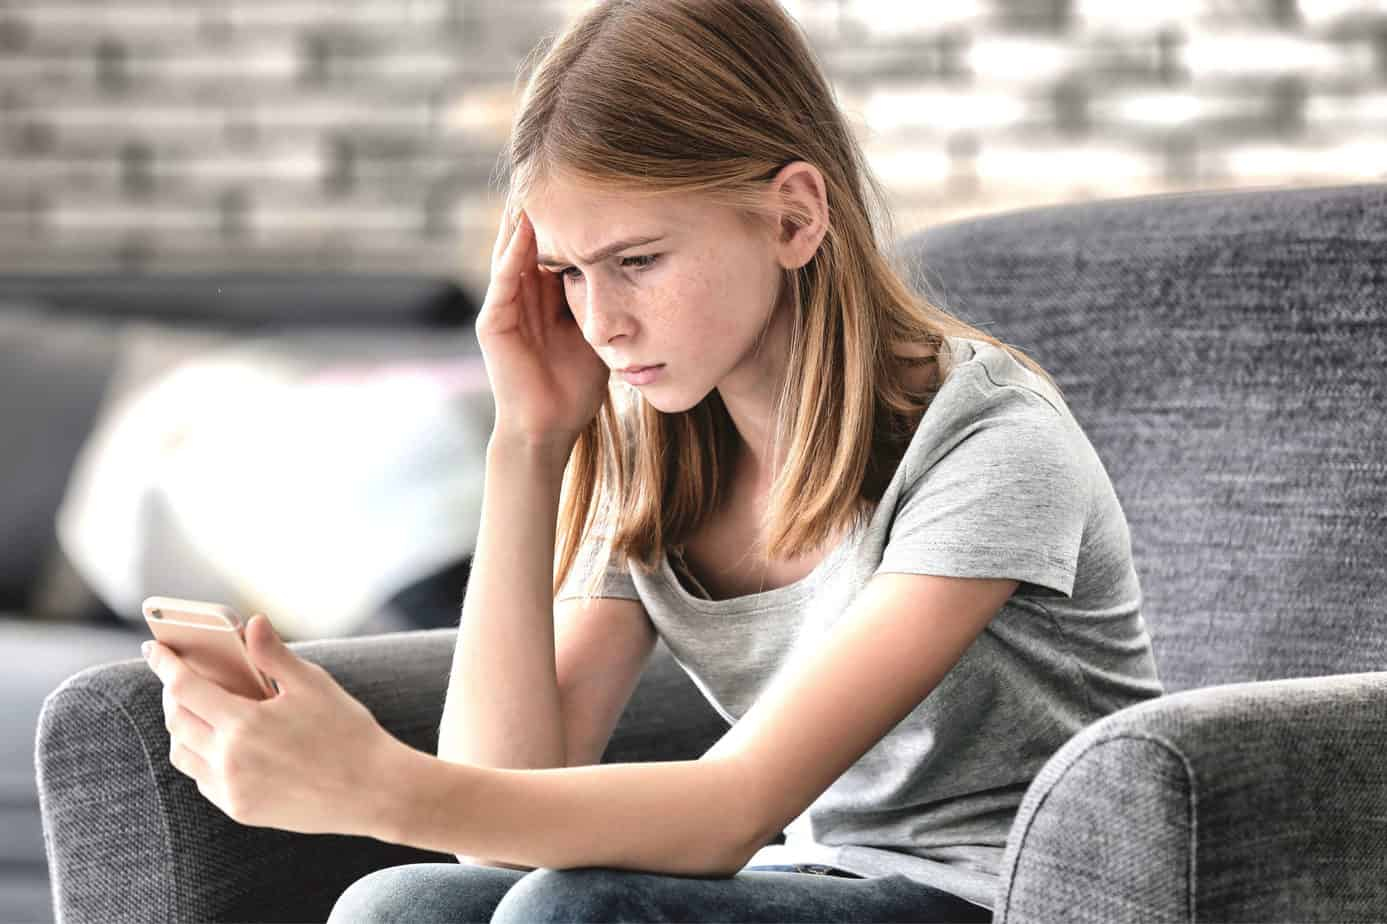 The Truth About Sexting: What Parents Should Know